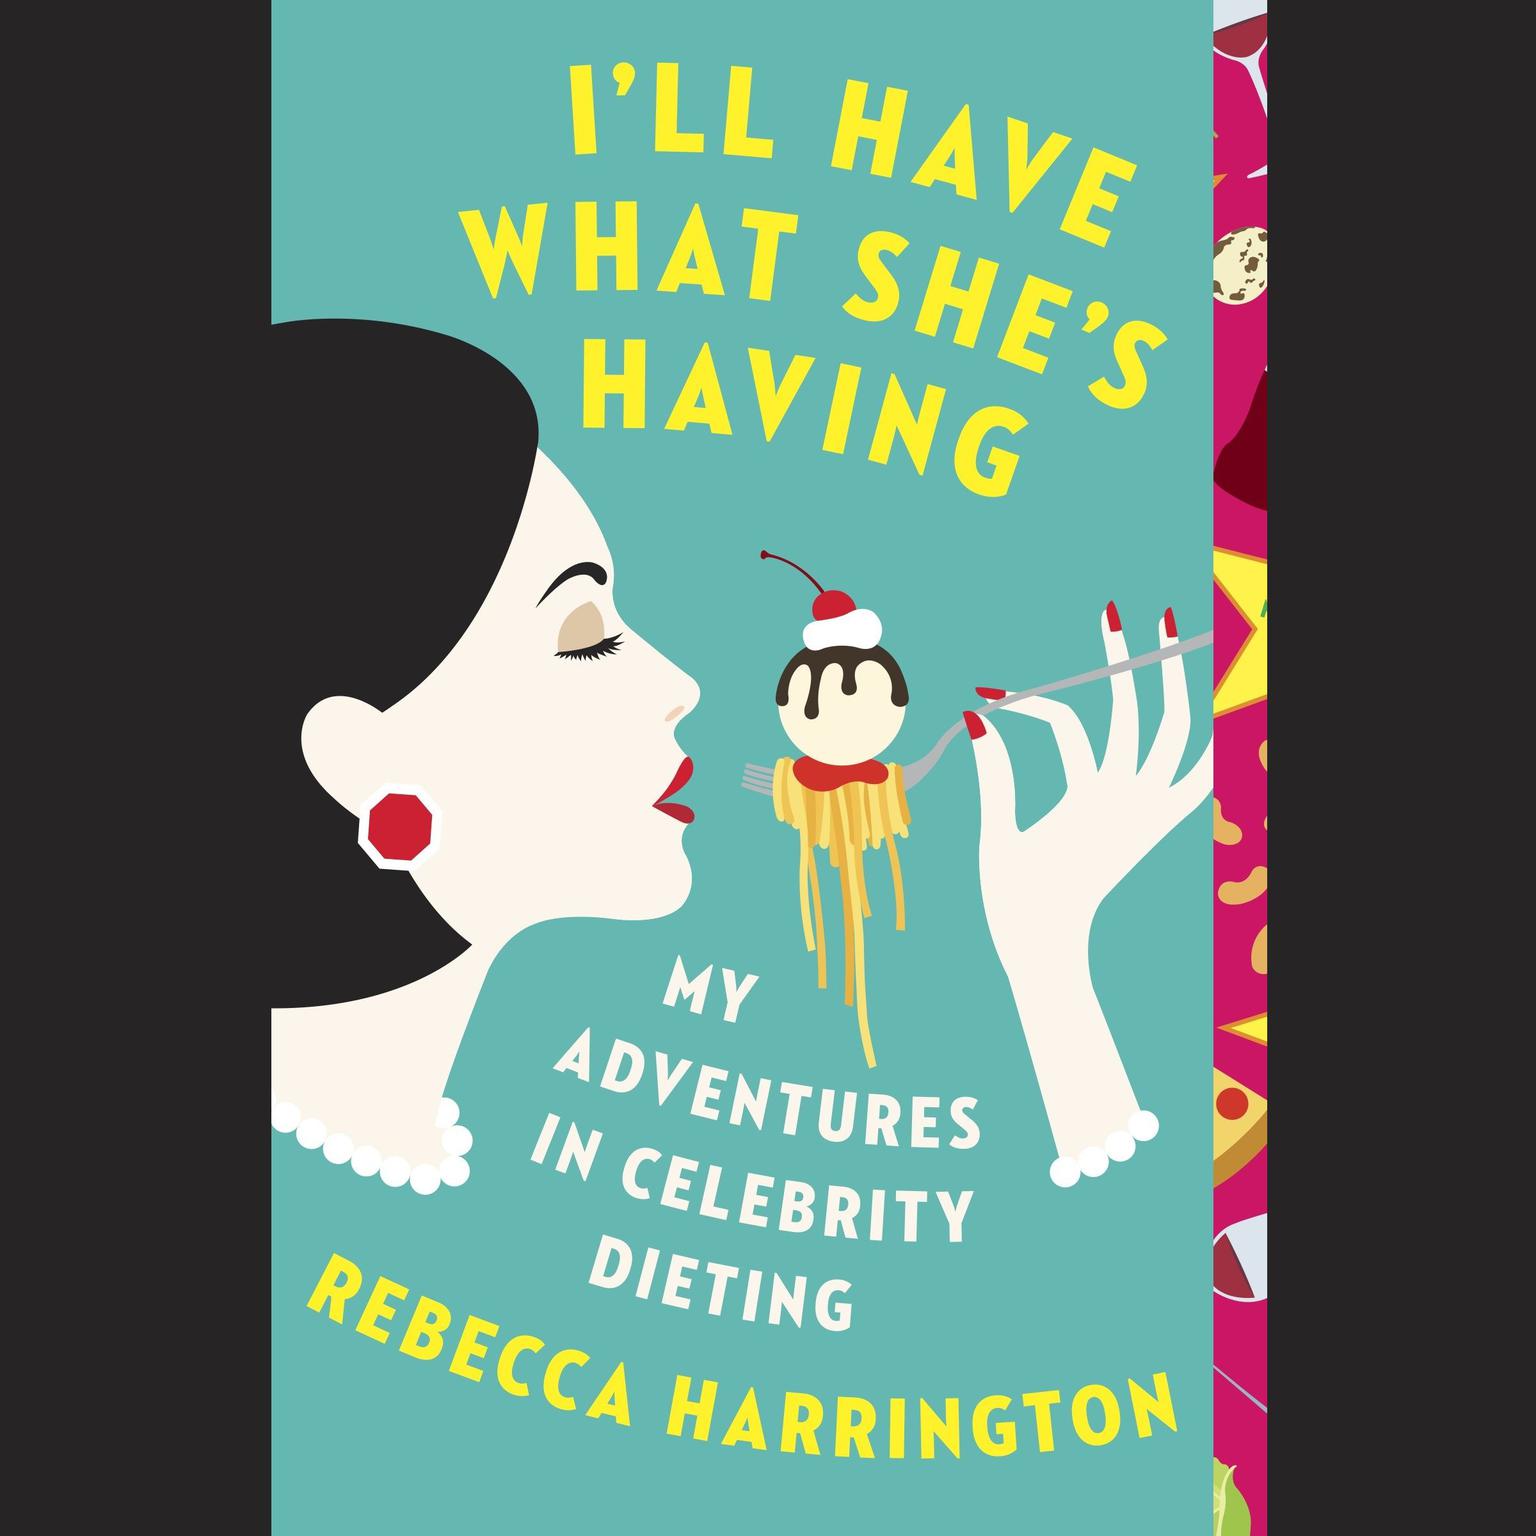 Ill Have What Shes Having: My Adventures in Celebrity Dieting Audiobook, by Rebecca Harrington